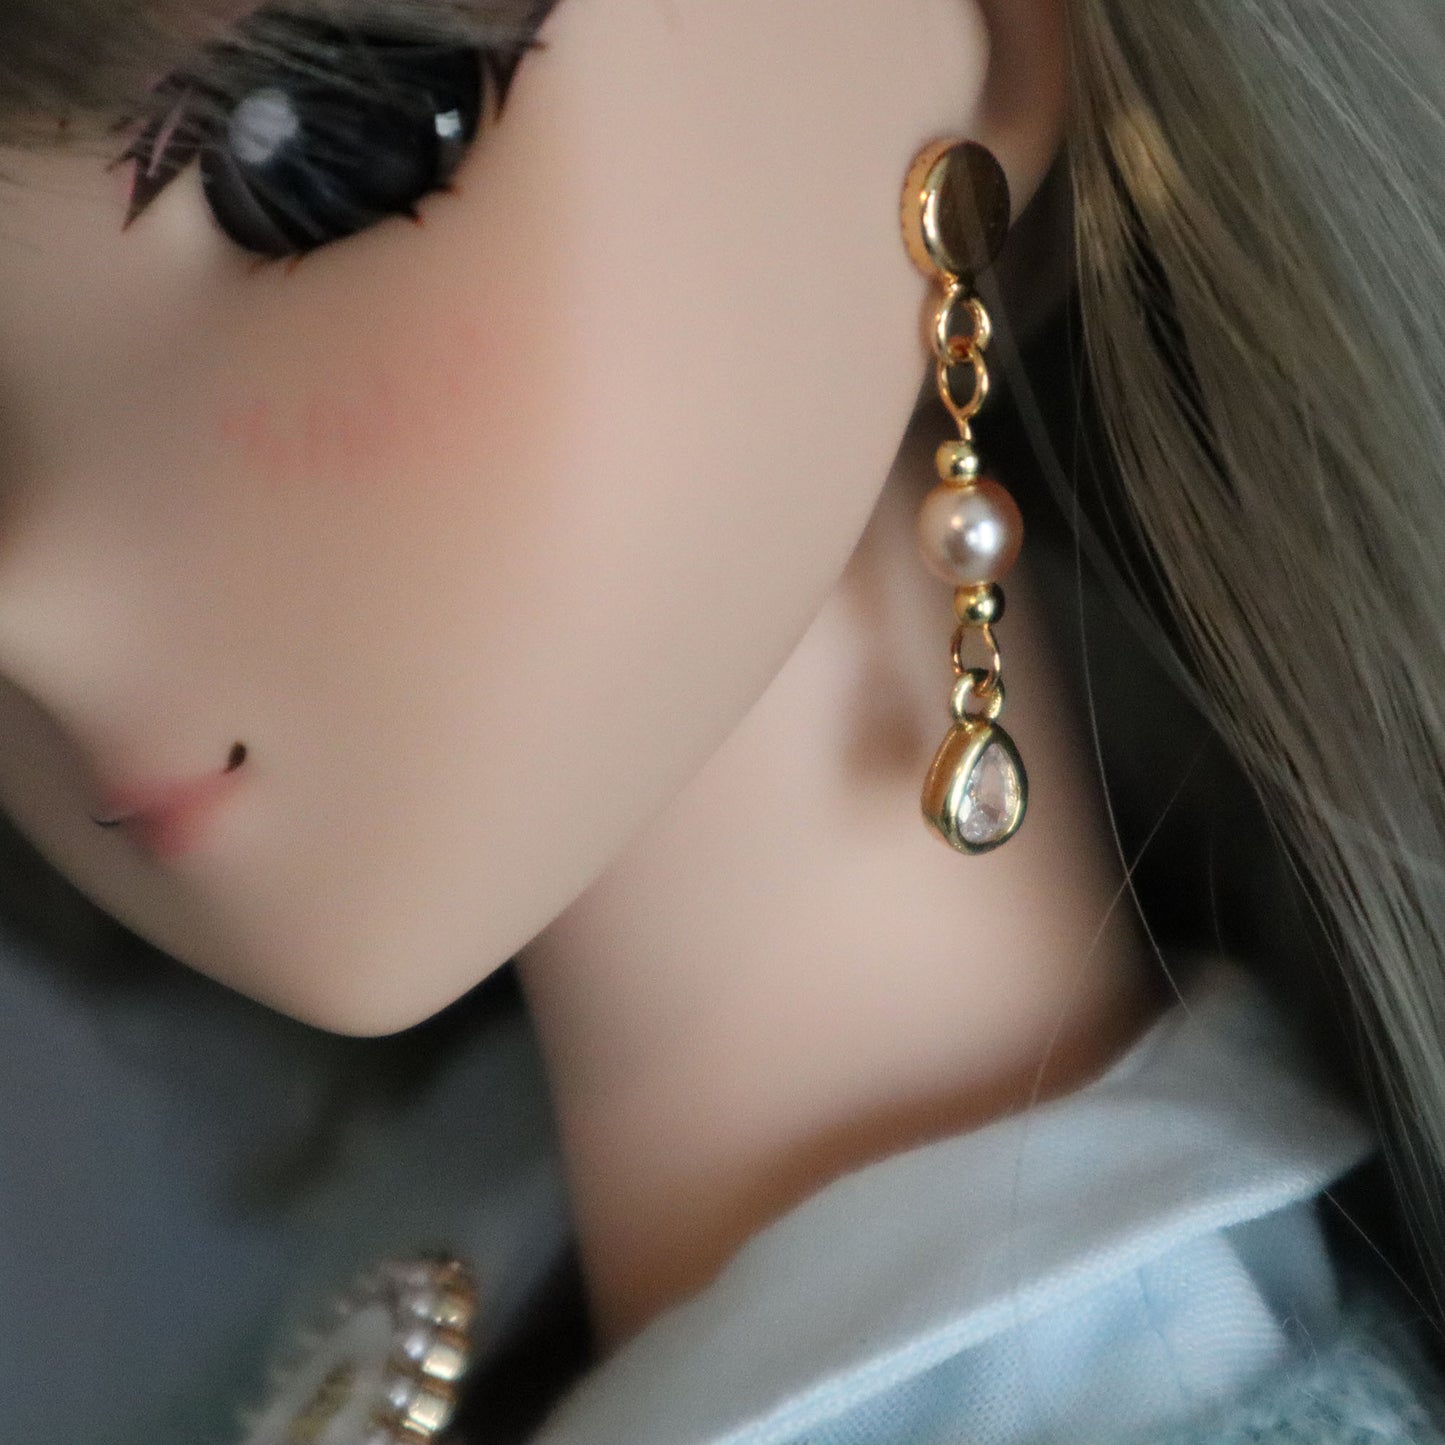 No-Hole Earrigns for Dolls - Tiny Crystal & Pearl Drops